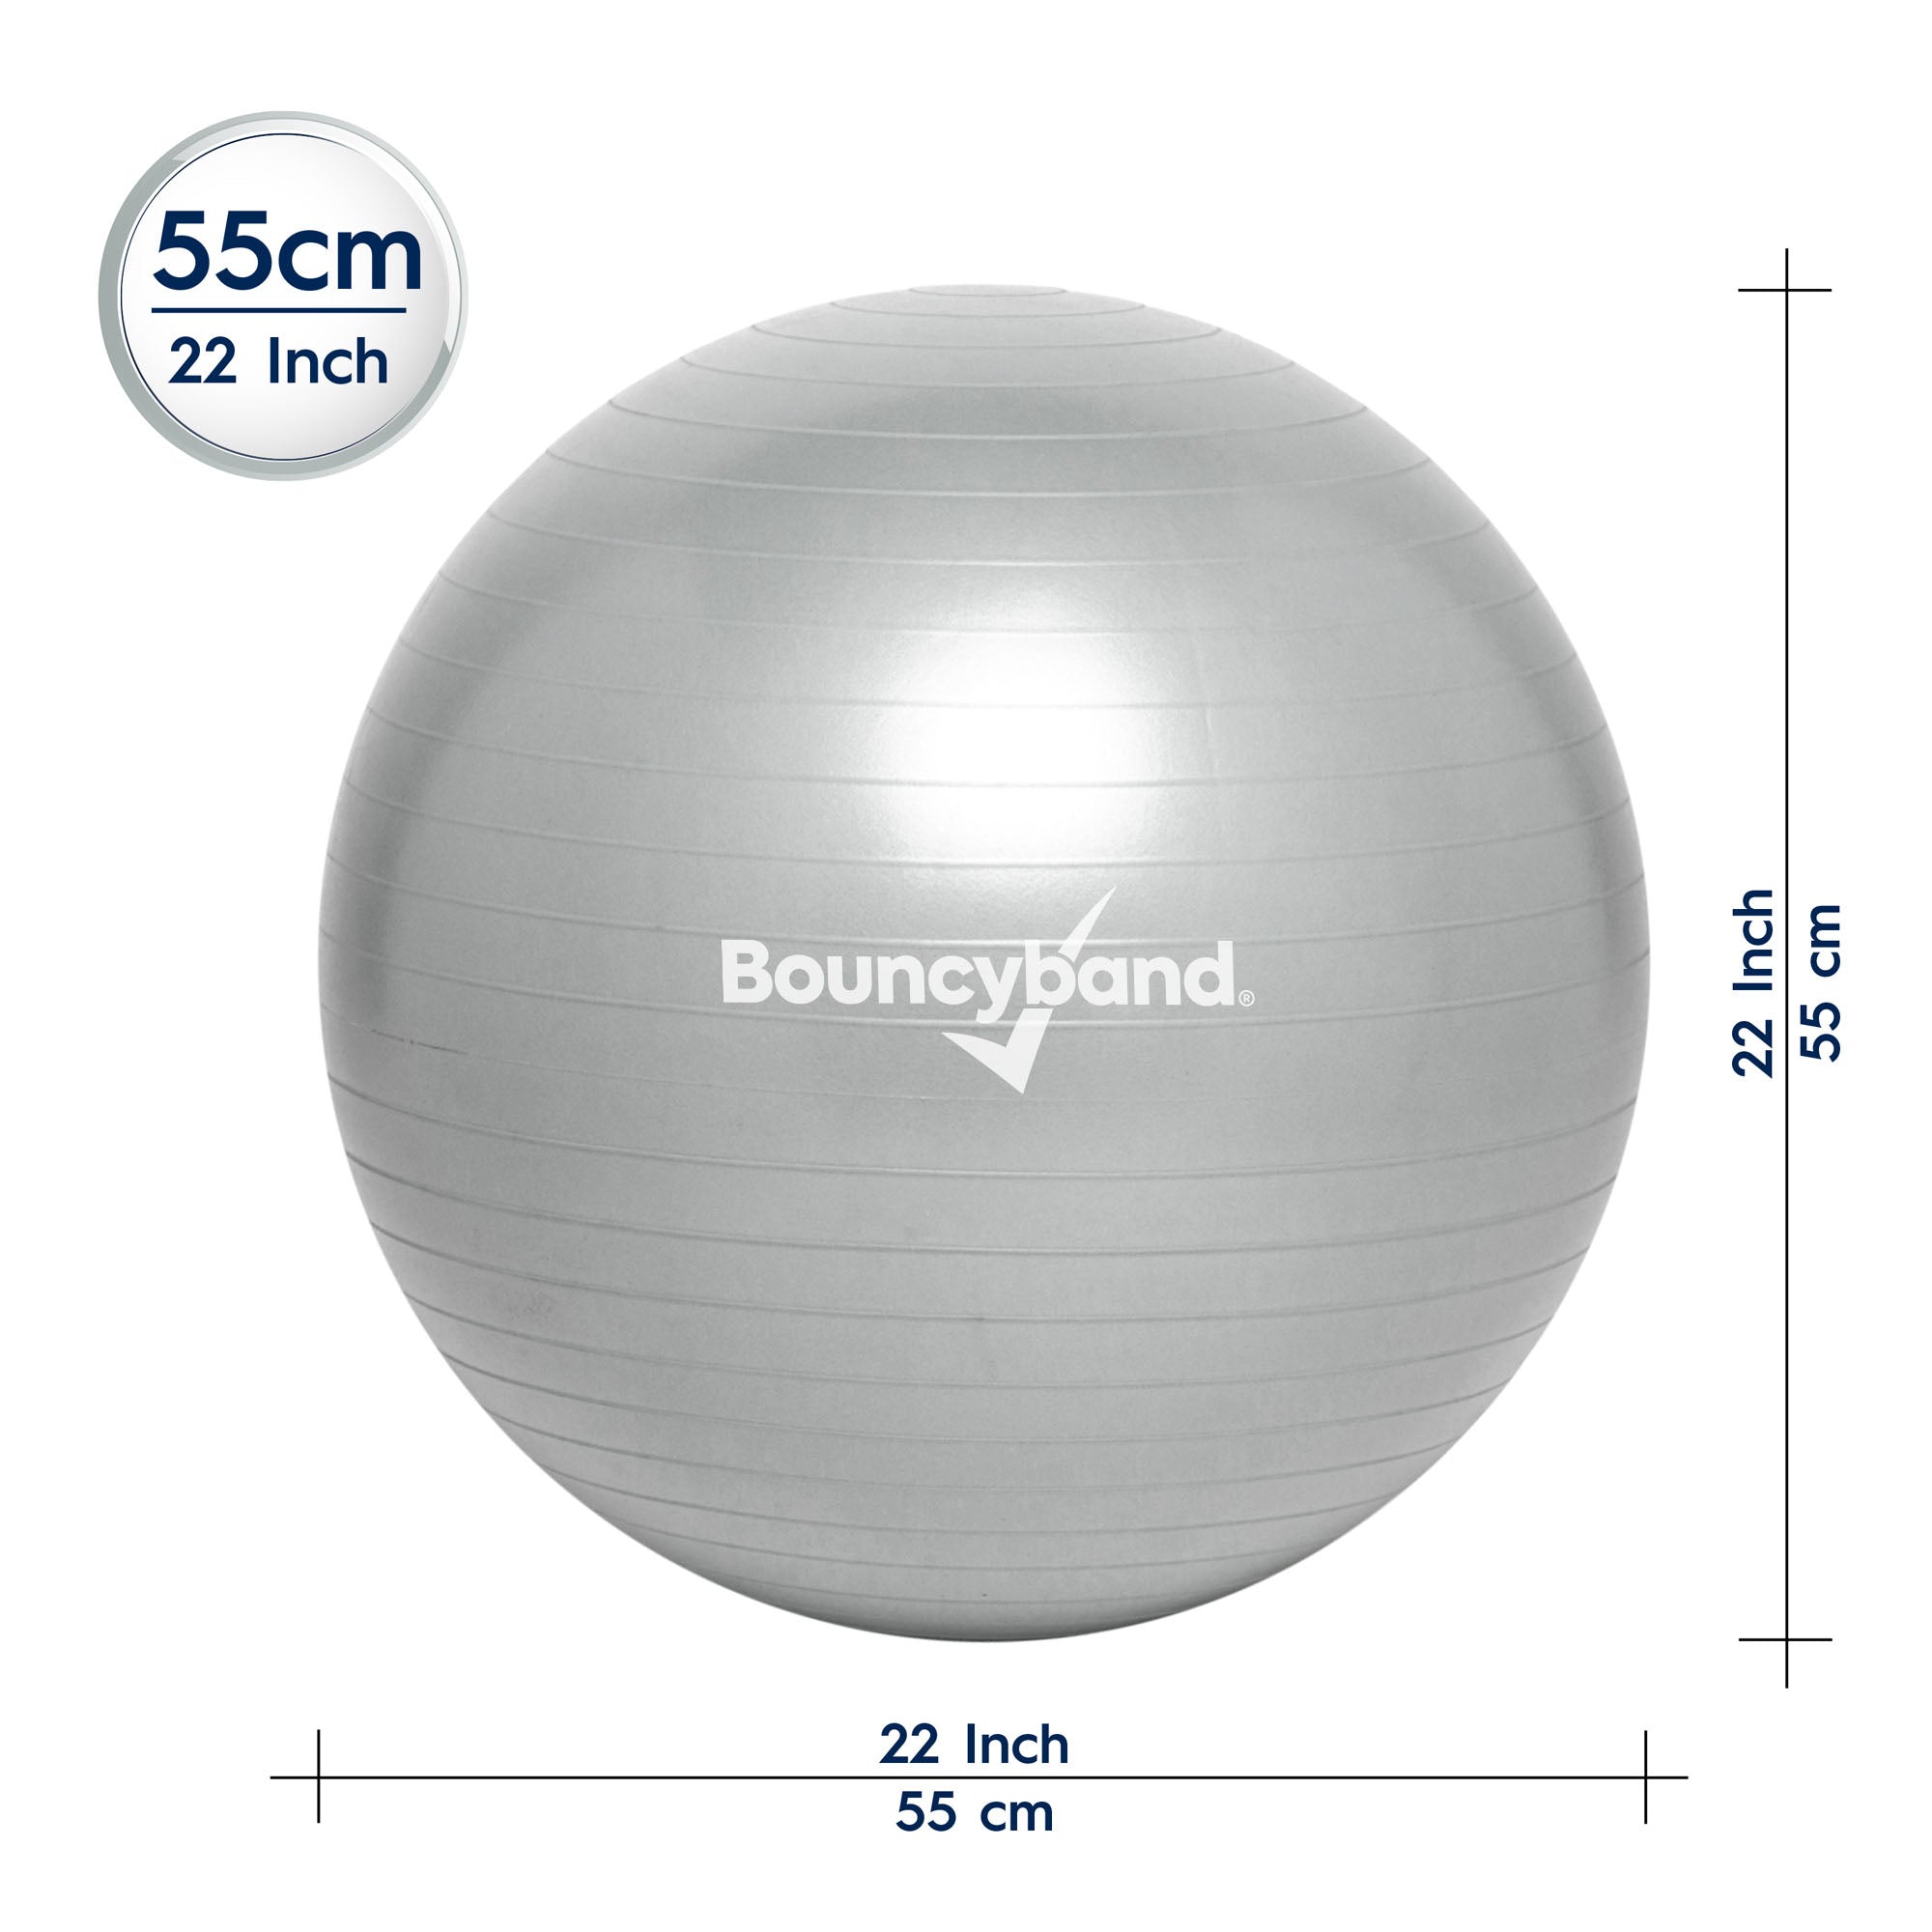 Weighted Yoga Balance Ball Chair For Kids And Adults Up To 5 6